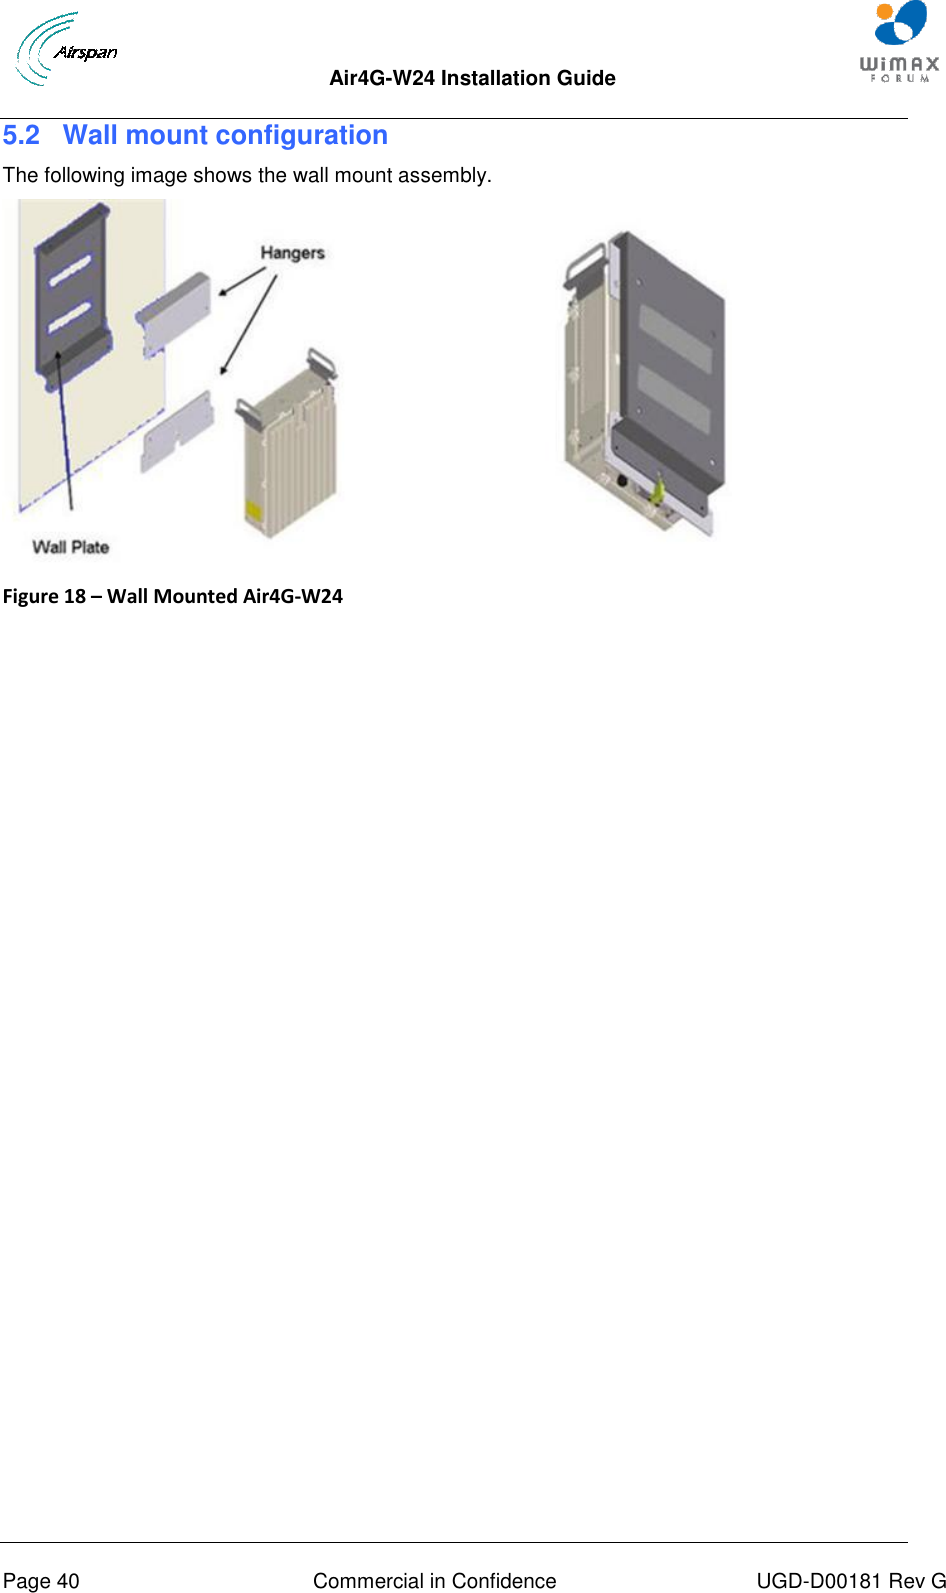  Air4G-W24 Installation Guide       Page 40  Commercial in Confidence  UGD-D00181 Rev G 5.2  Wall mount configuration The following image shows the wall mount assembly.  Figure 18 – Wall Mounted Air4G-W24   